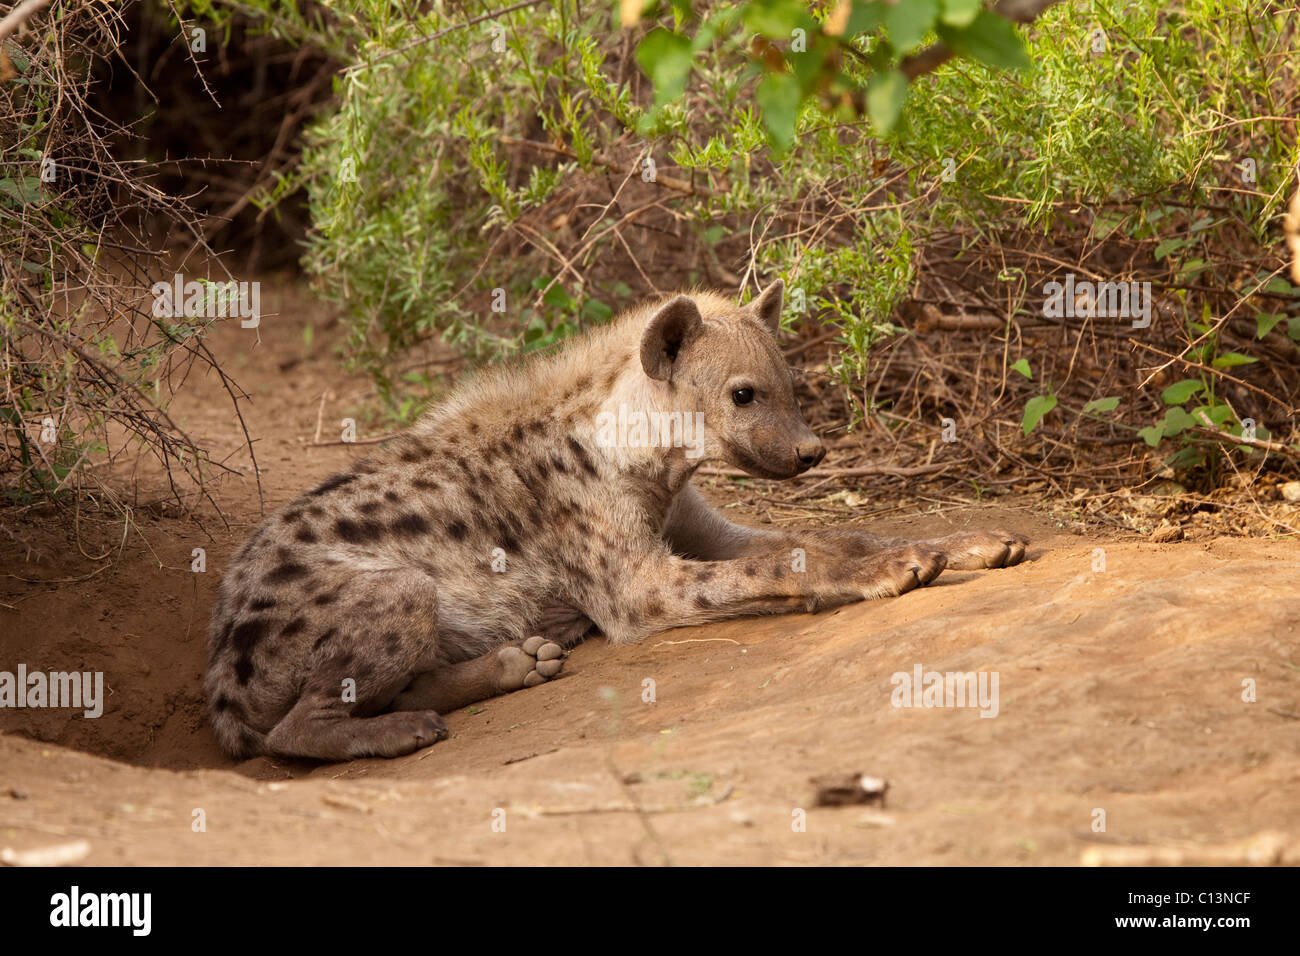 Spotted Hyena (Crocuta crocuta). Hyena adult and pup at their den. Stock Photo